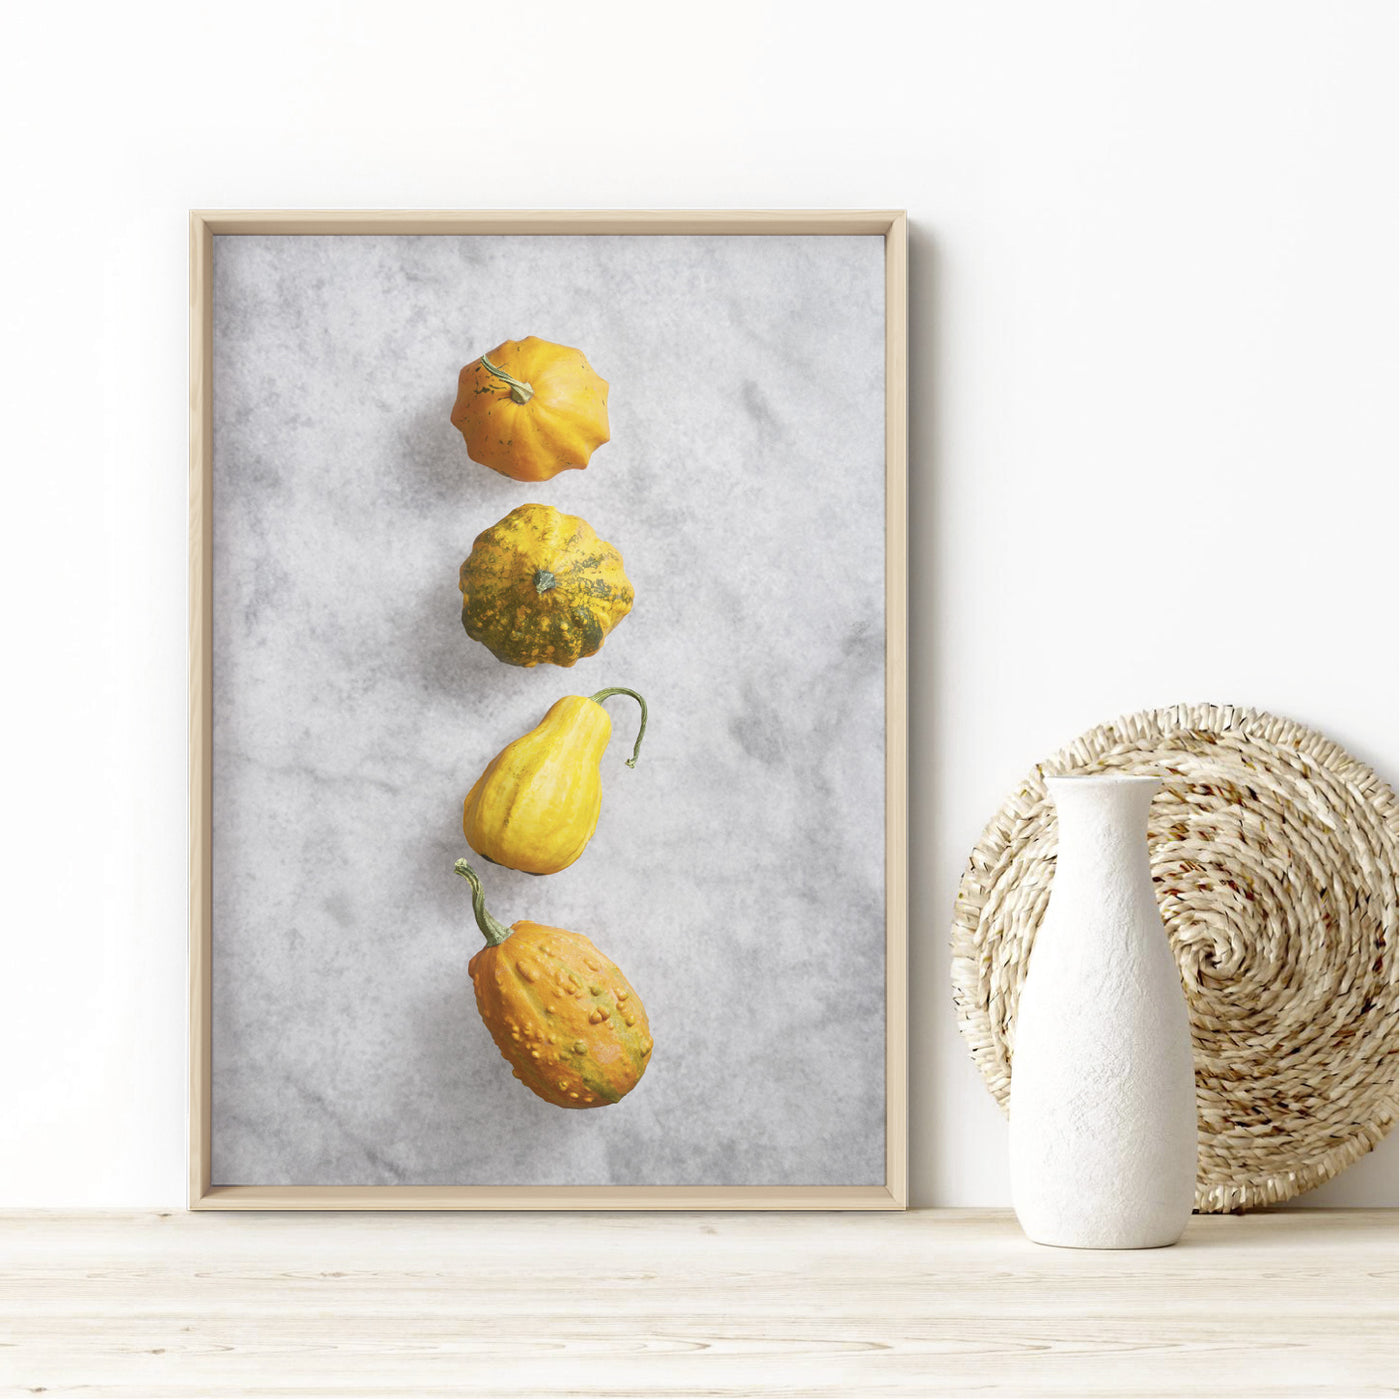 Pumpkins on Stone - Art Print, Poster, Stretched Canvas or Framed Wall Art Prints, shown framed in a room